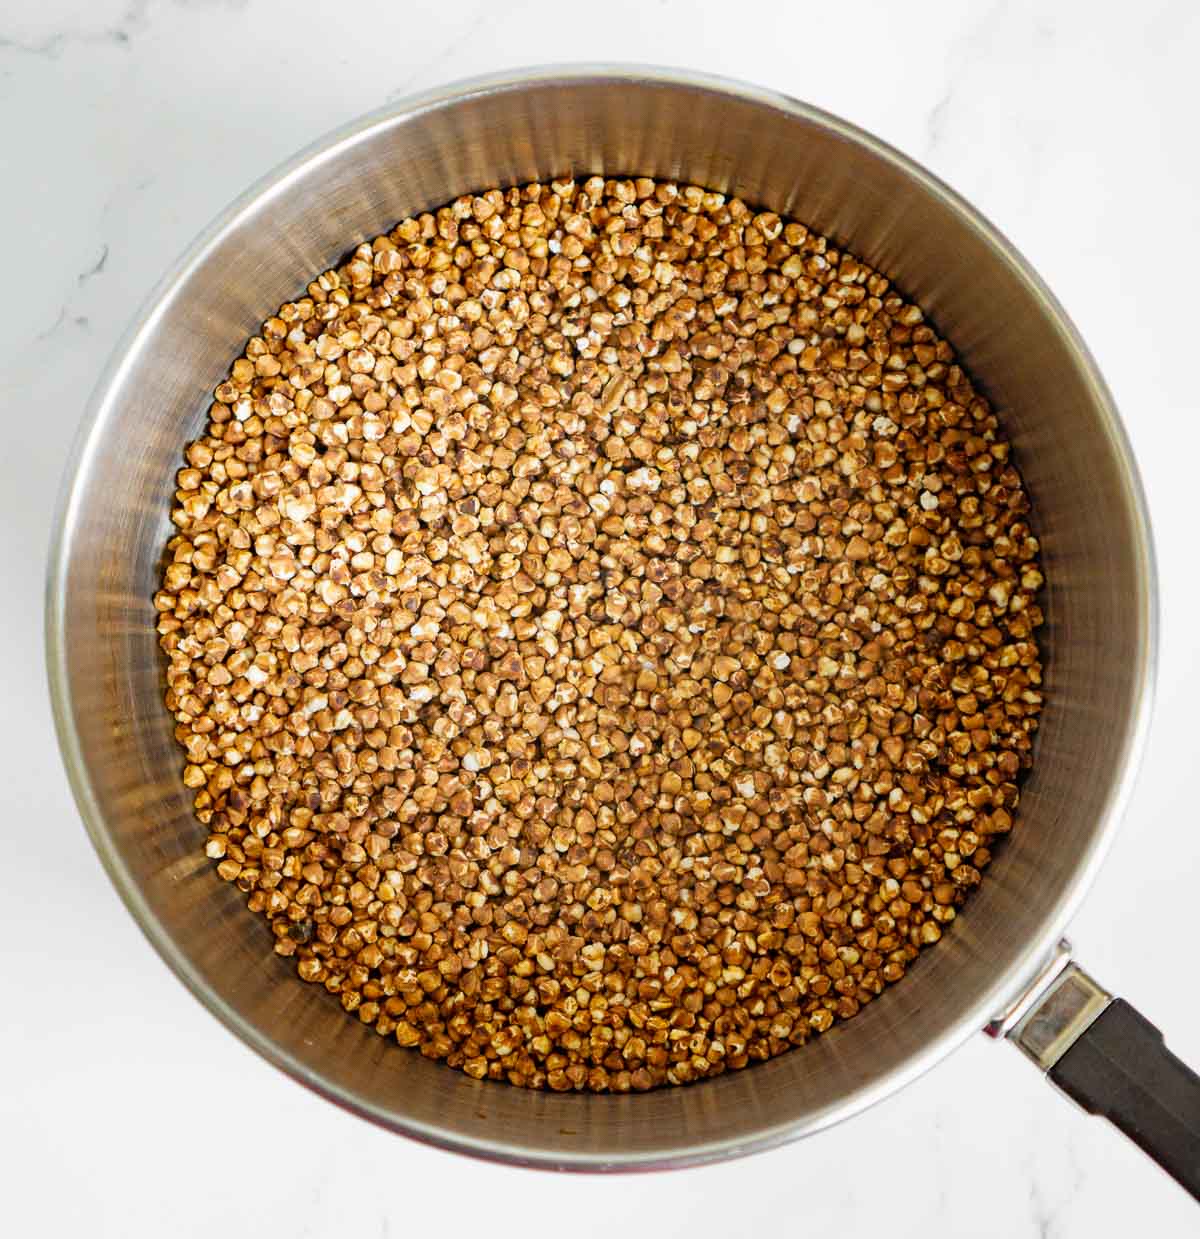 Toasted buckwheat groats in a pot